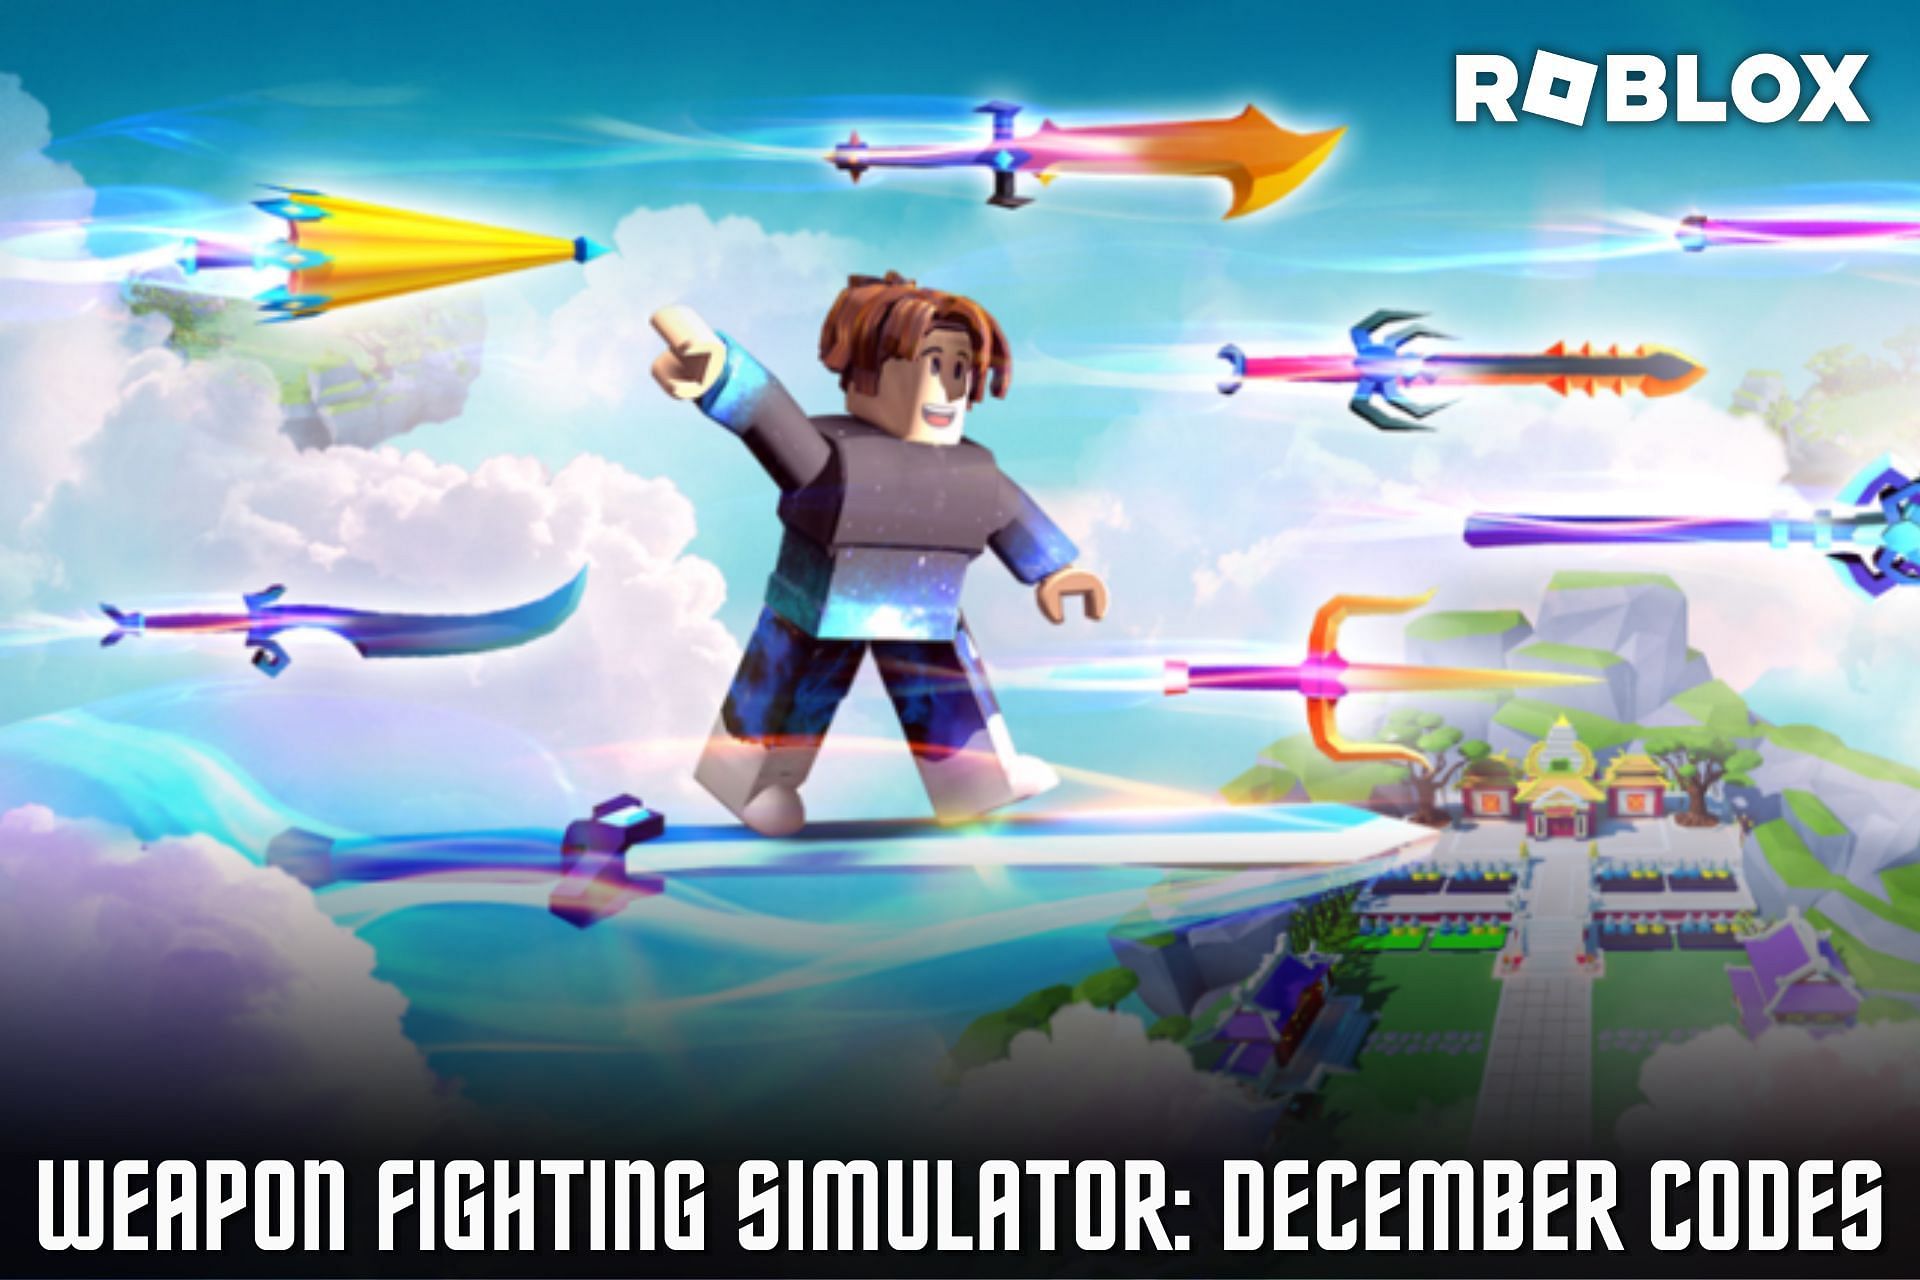 Weapon Fighting Simulator Codes (December 2023) - Free boosts! - Pro Game  Guides